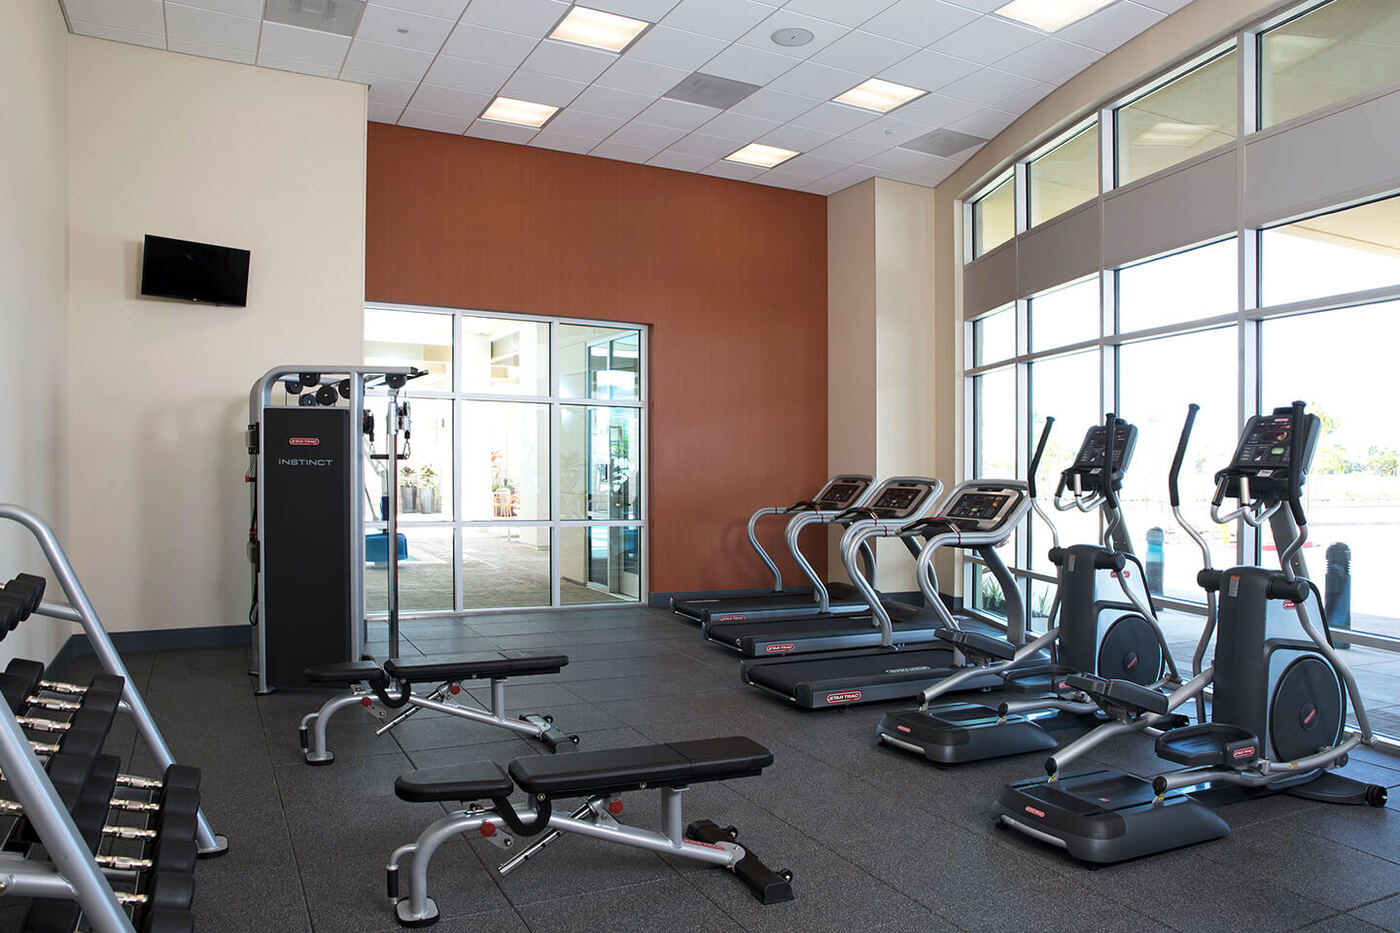 Fitness center with weight and cardio machines